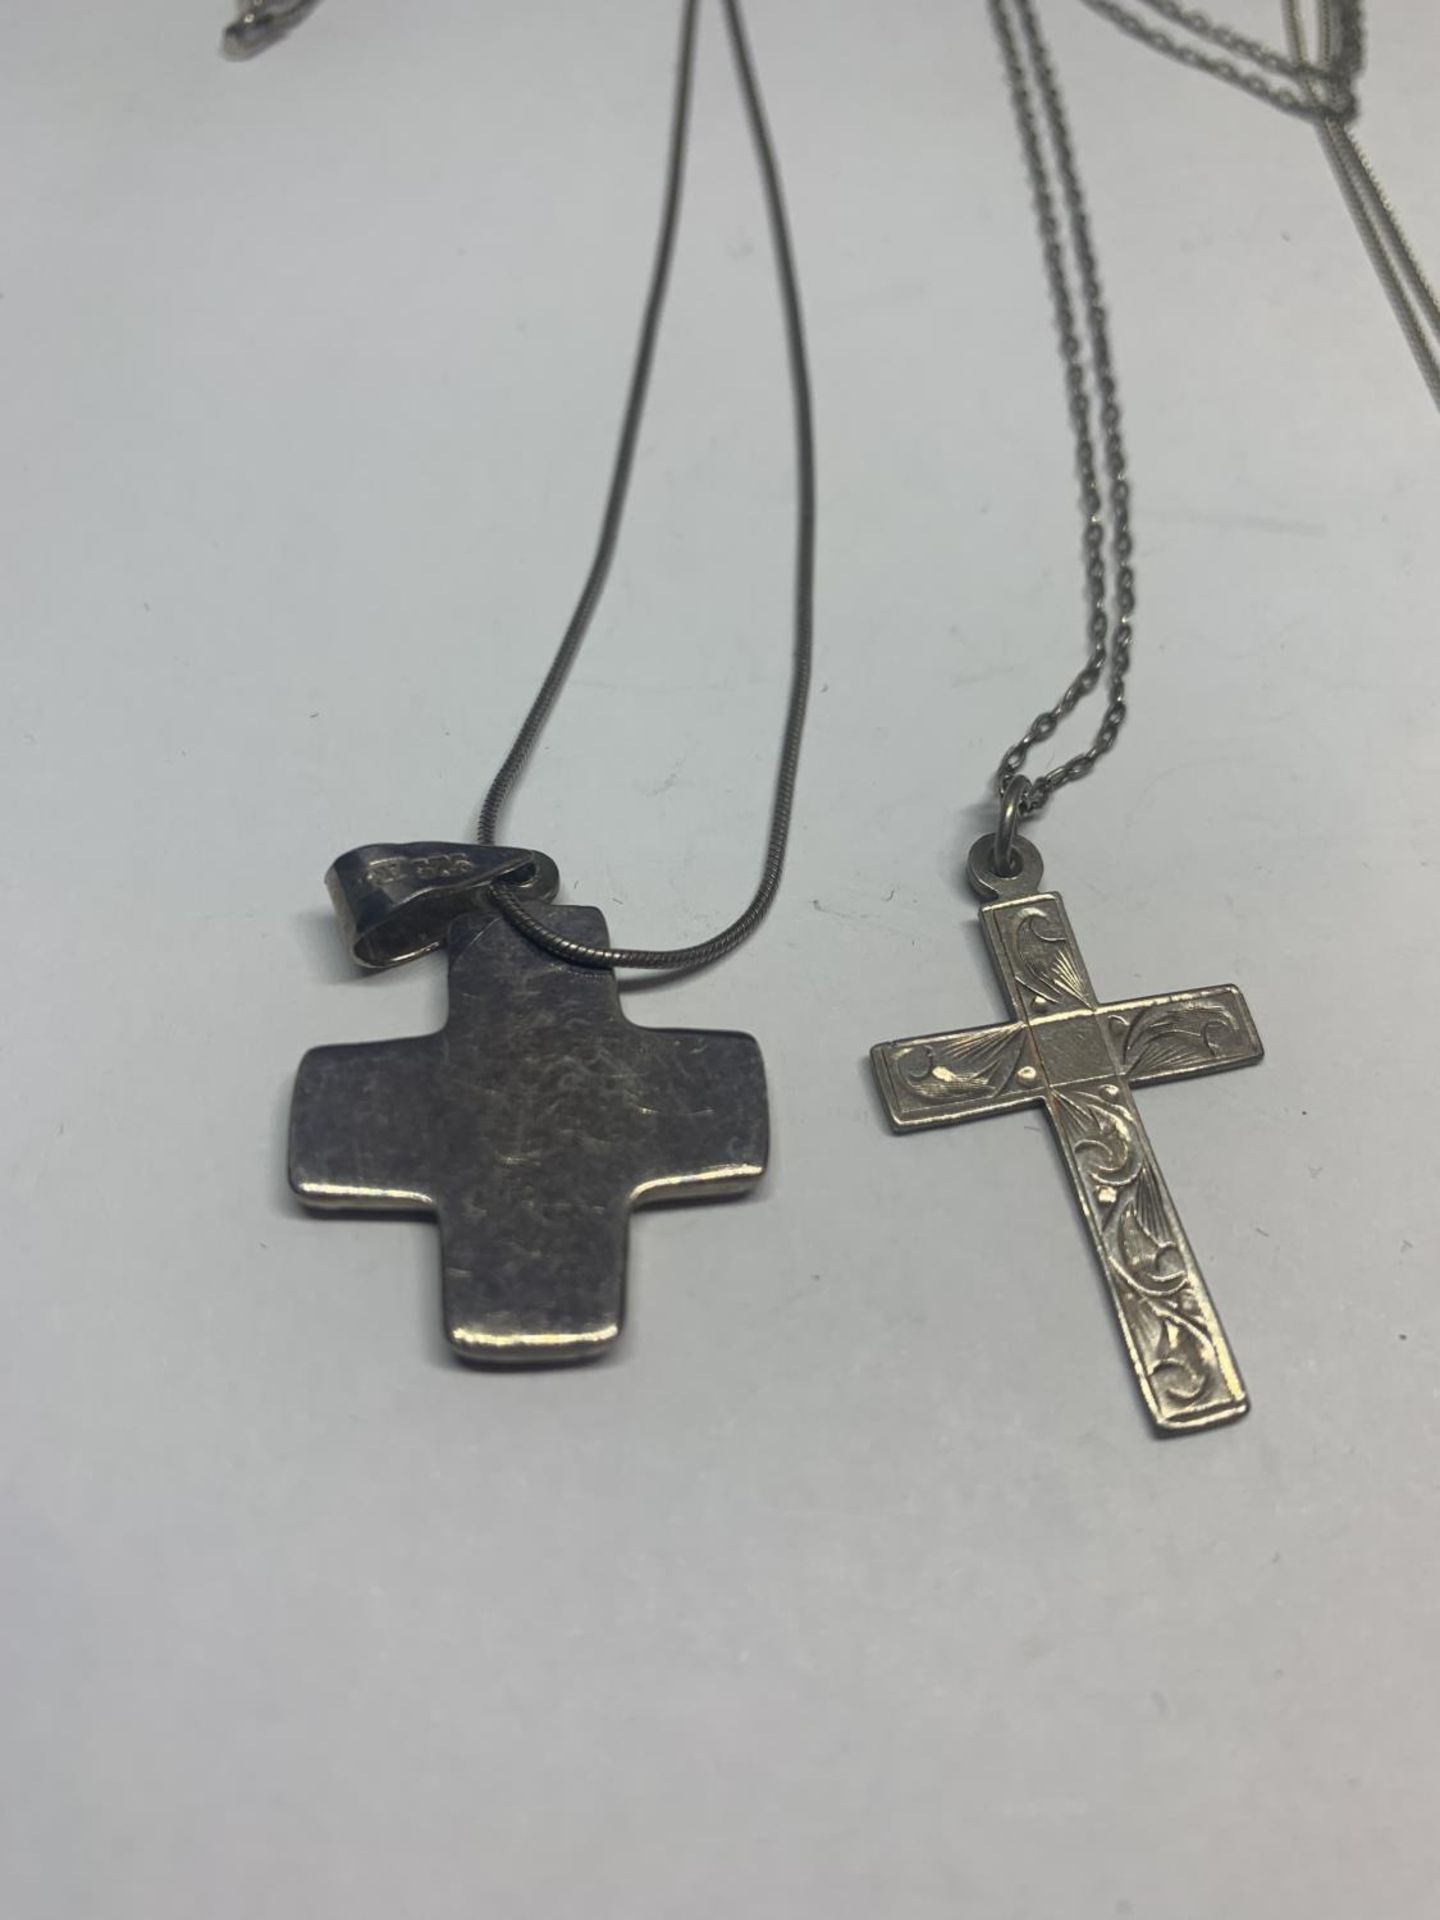 FOUR SILVER NECKLACES WITH CROSS PENDANTS IN A PRESENTATION BOX - Image 2 of 3